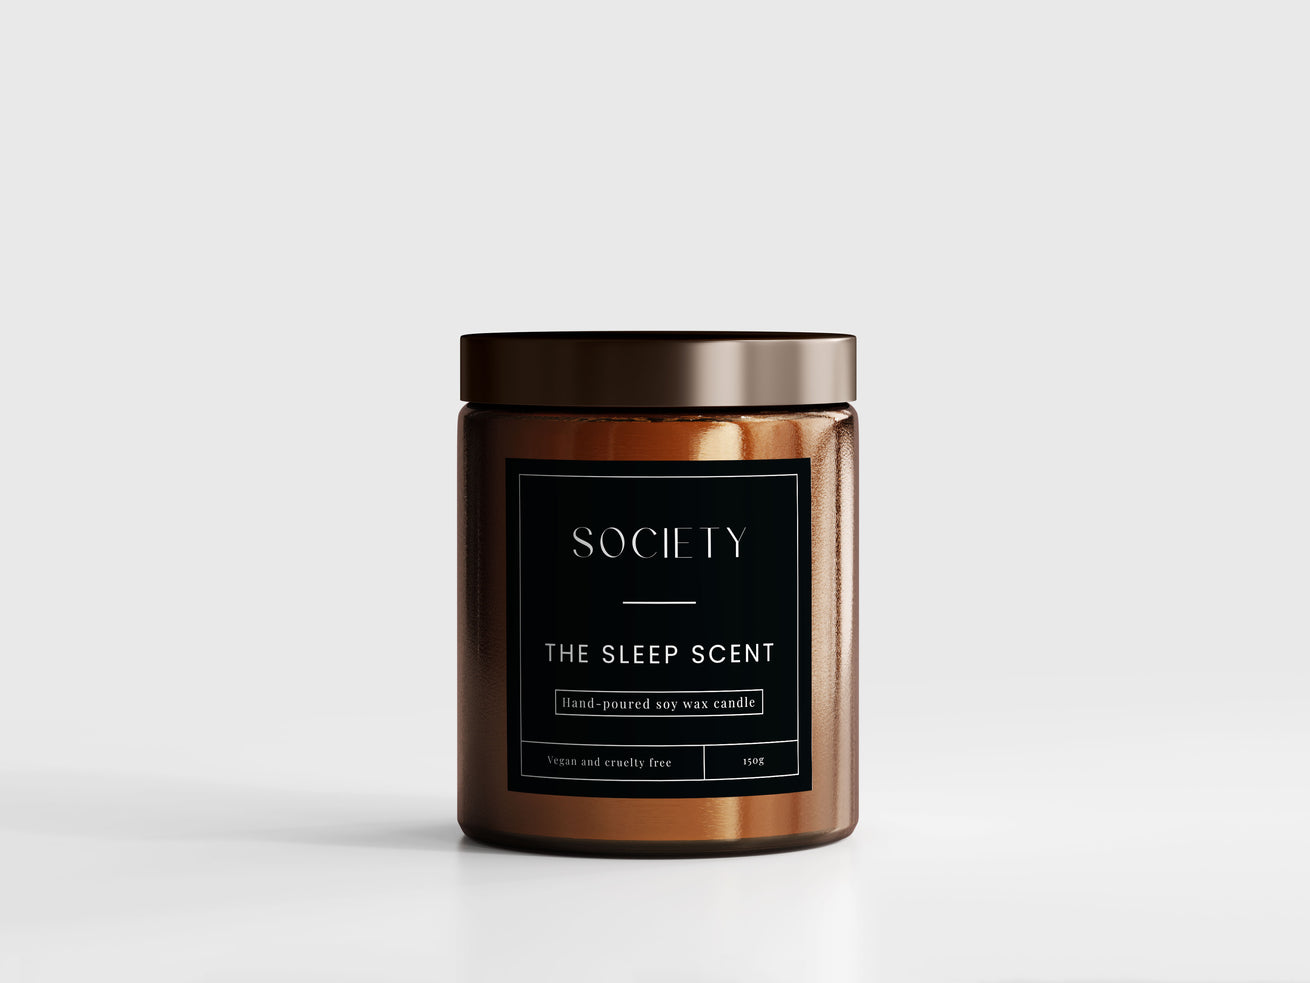 Hand poured soy wax candle for sleep relaxation